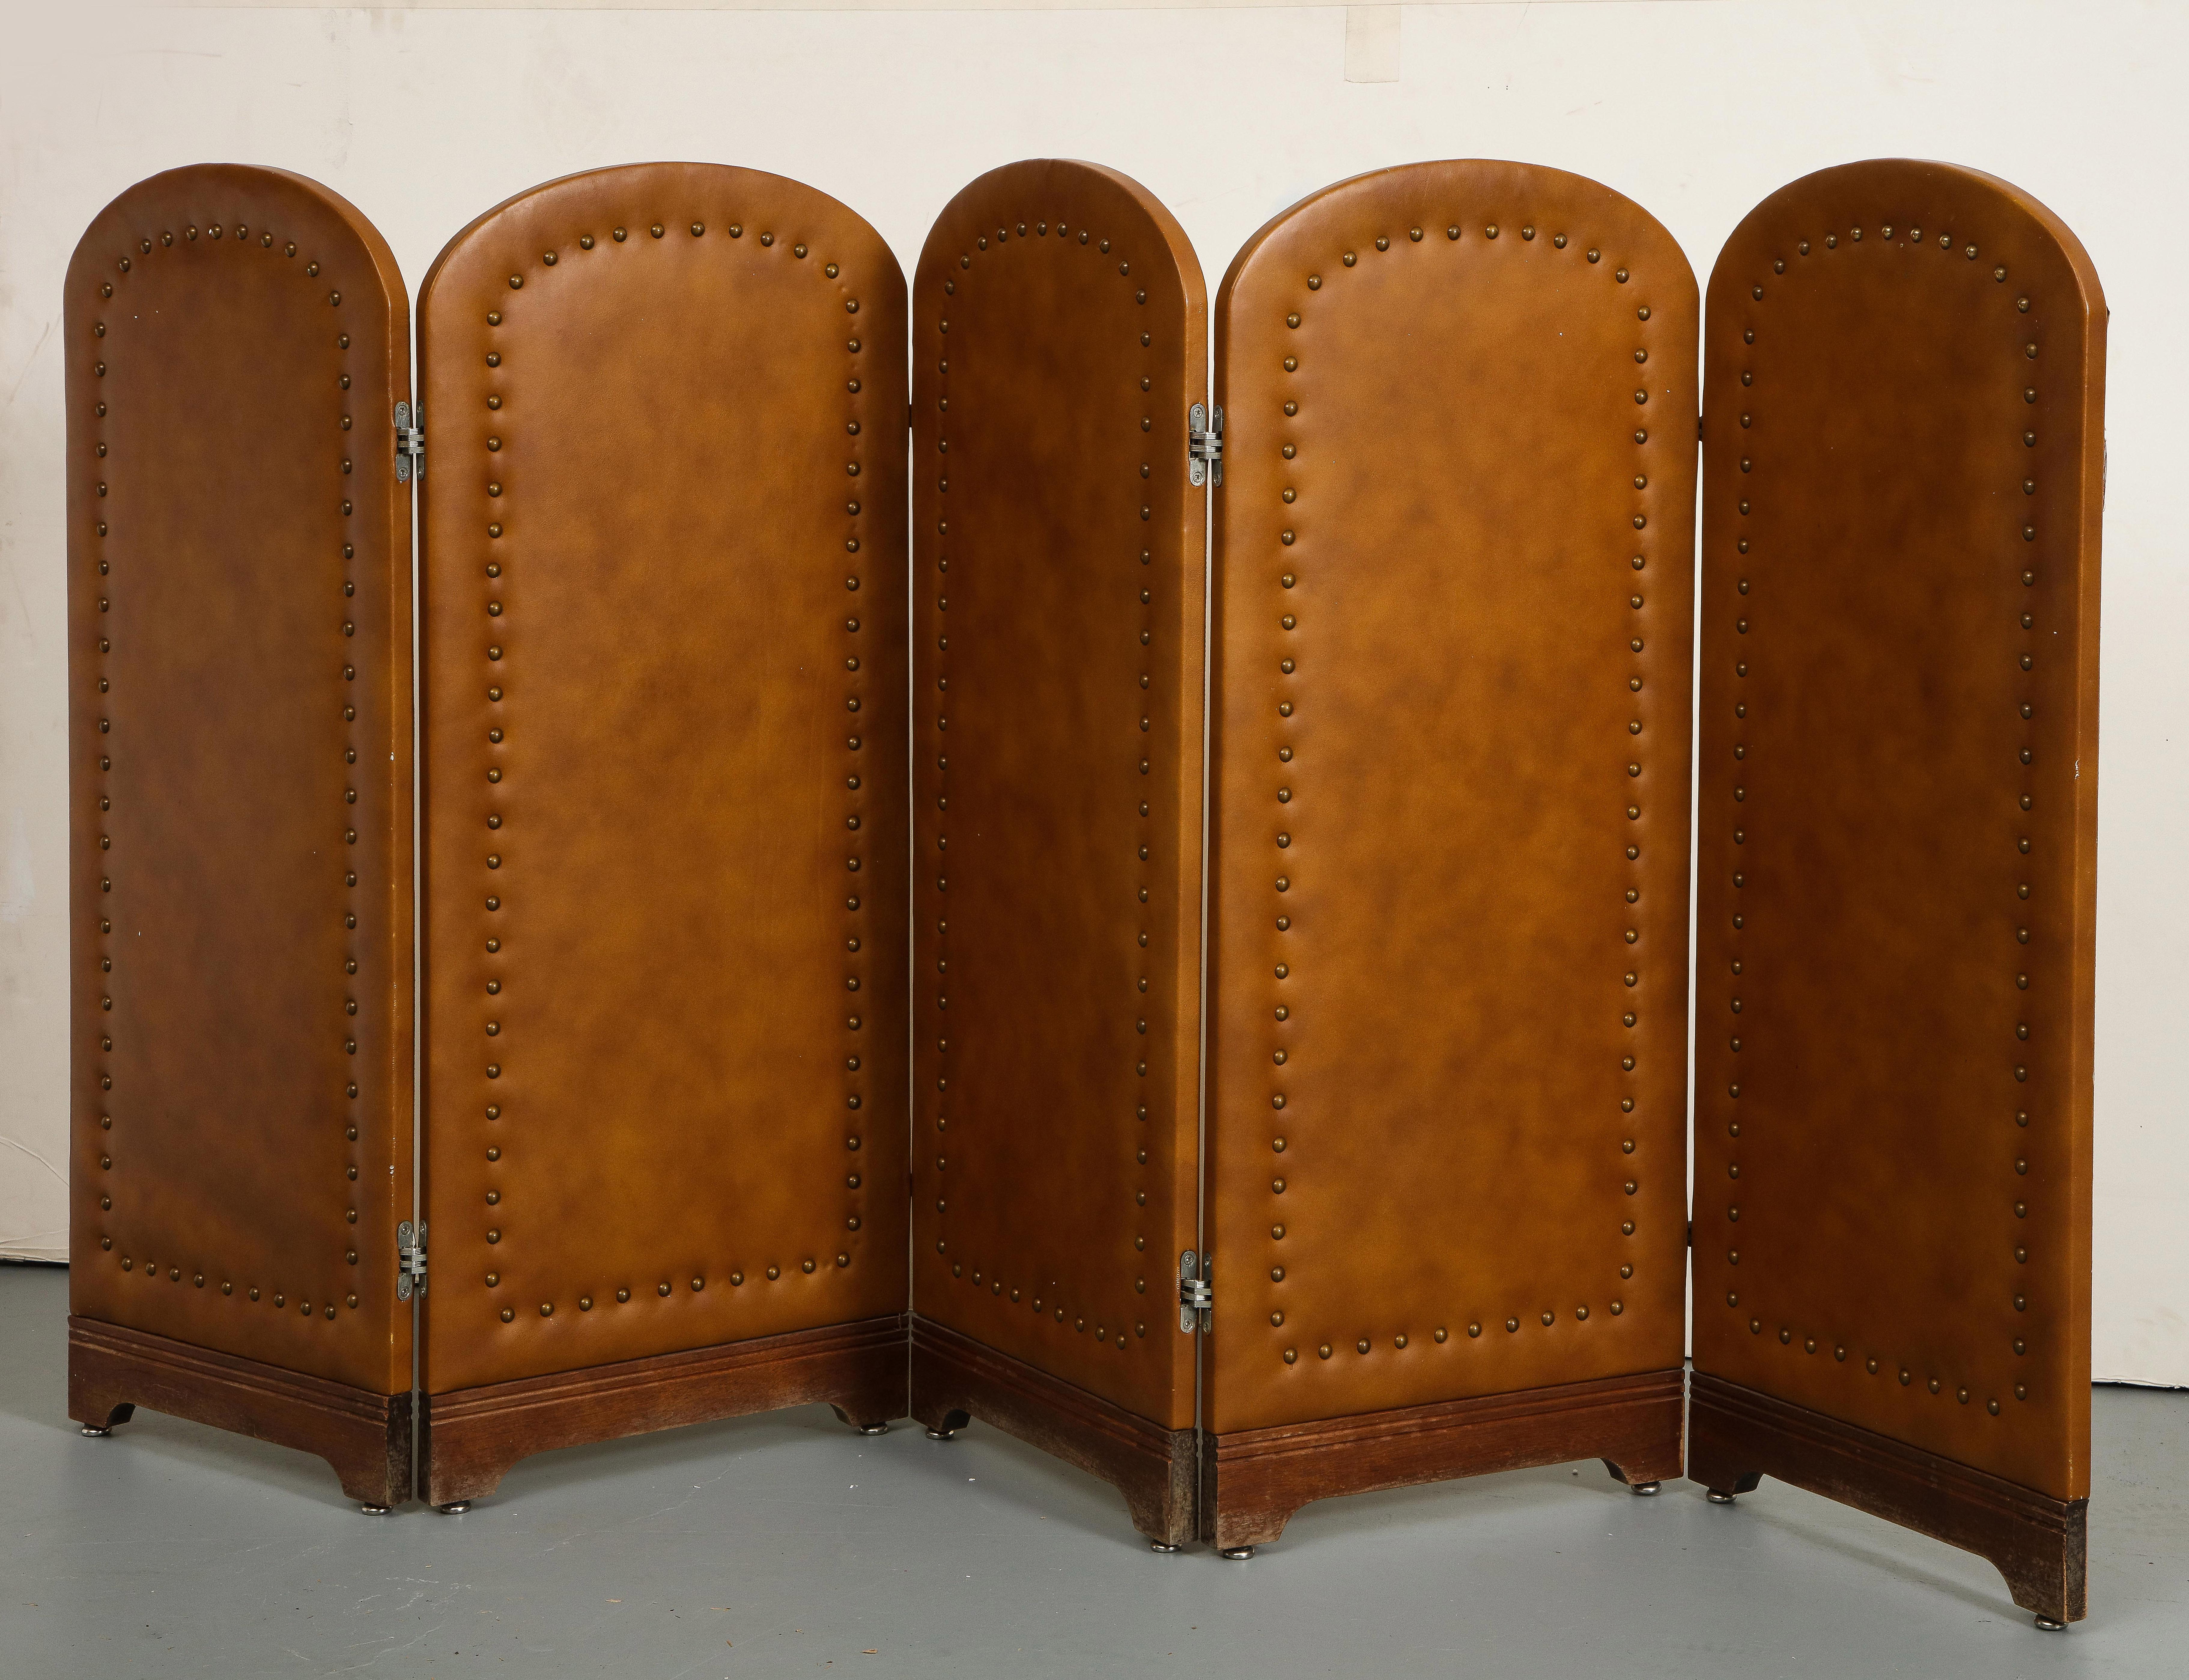 Vintage leather folding screen with 5 panels, c. 1960. Arched tops and brass nail head details on saddle brown leather over walnut frames. Silver metal feet on each panel. 

Each panel measures 16